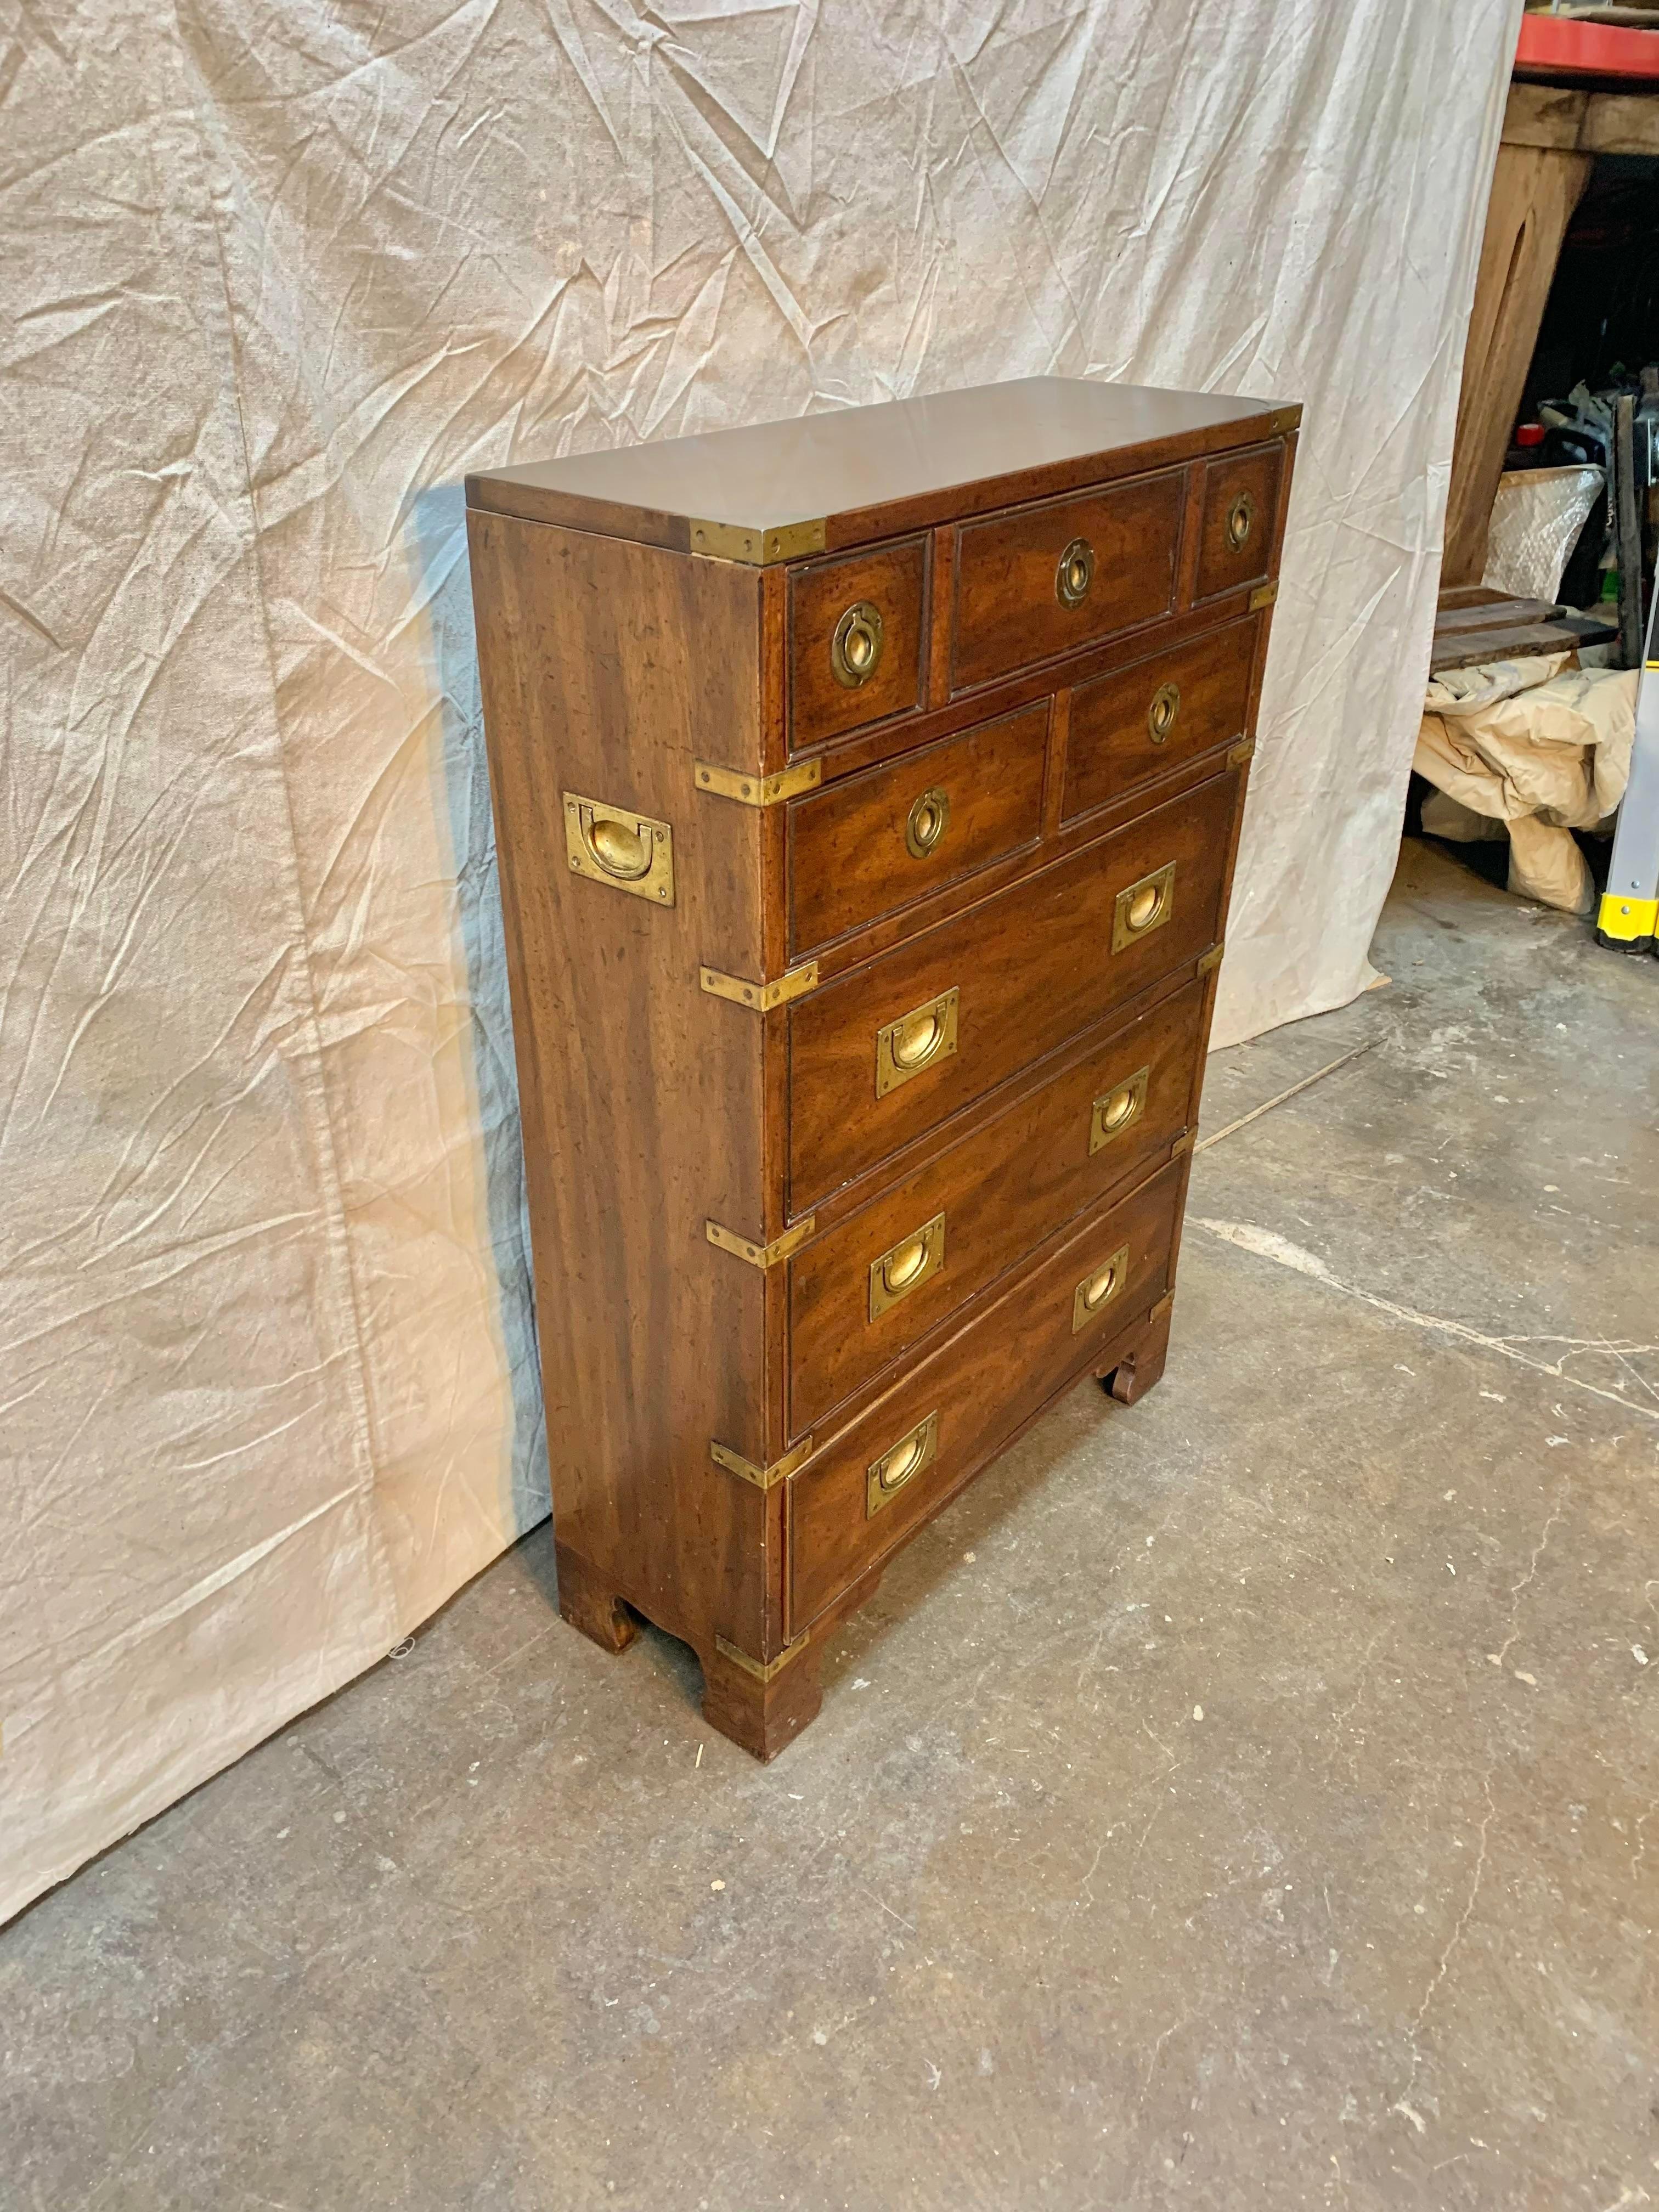 This Petite Campaign Chest was manufactored by Heritage in the late 20th century. The chest of drawers is crafted of walnut in warm hues and is brass bound and accented with inset brass hardware. The piece features 6 drawers, one large drawer at the